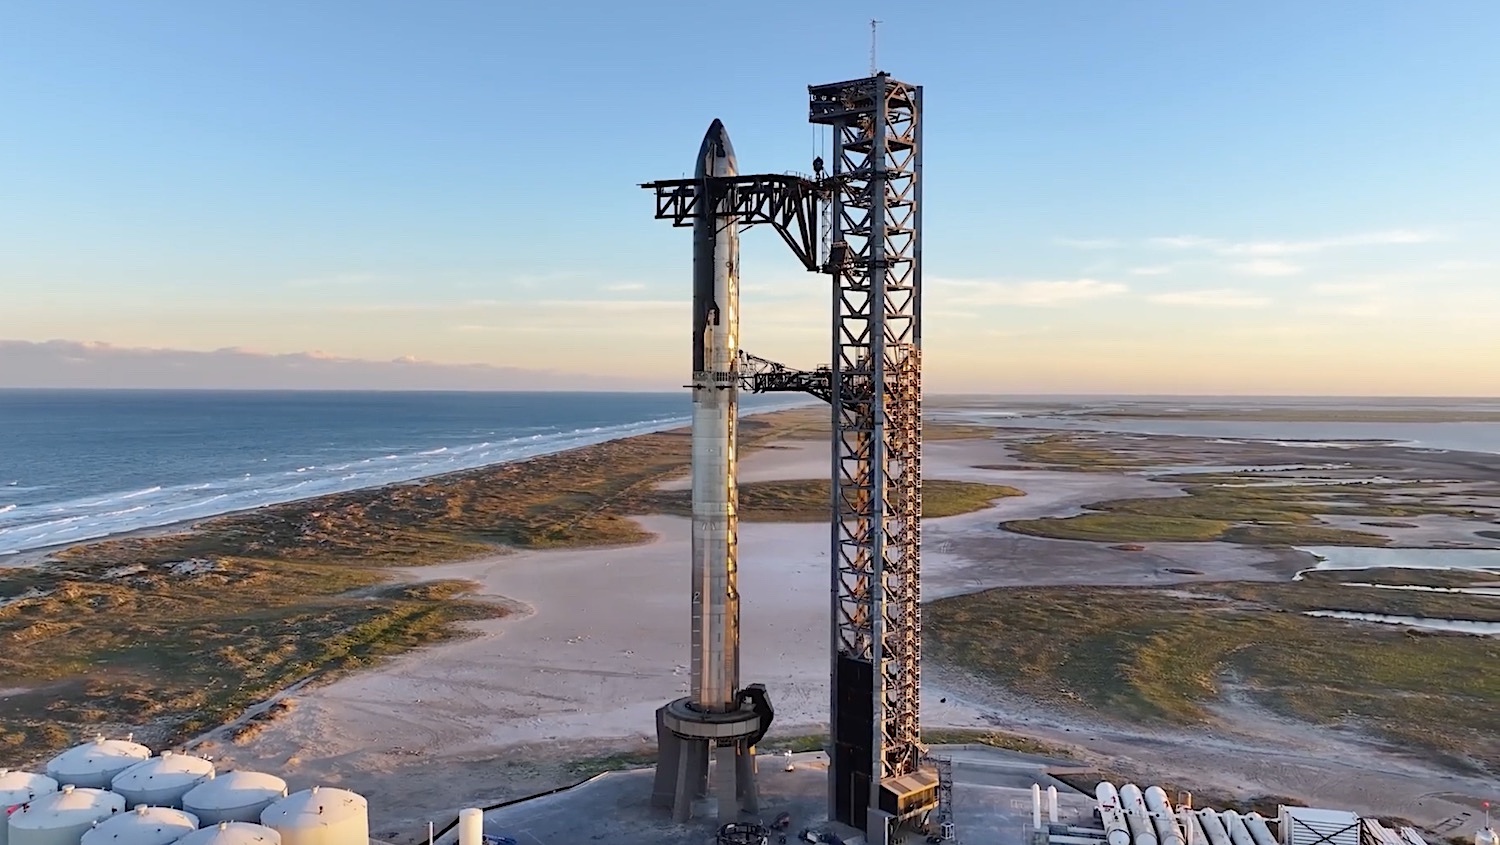 SpaceX has requested permission from the FAA for at least 9 Starship test launches this year